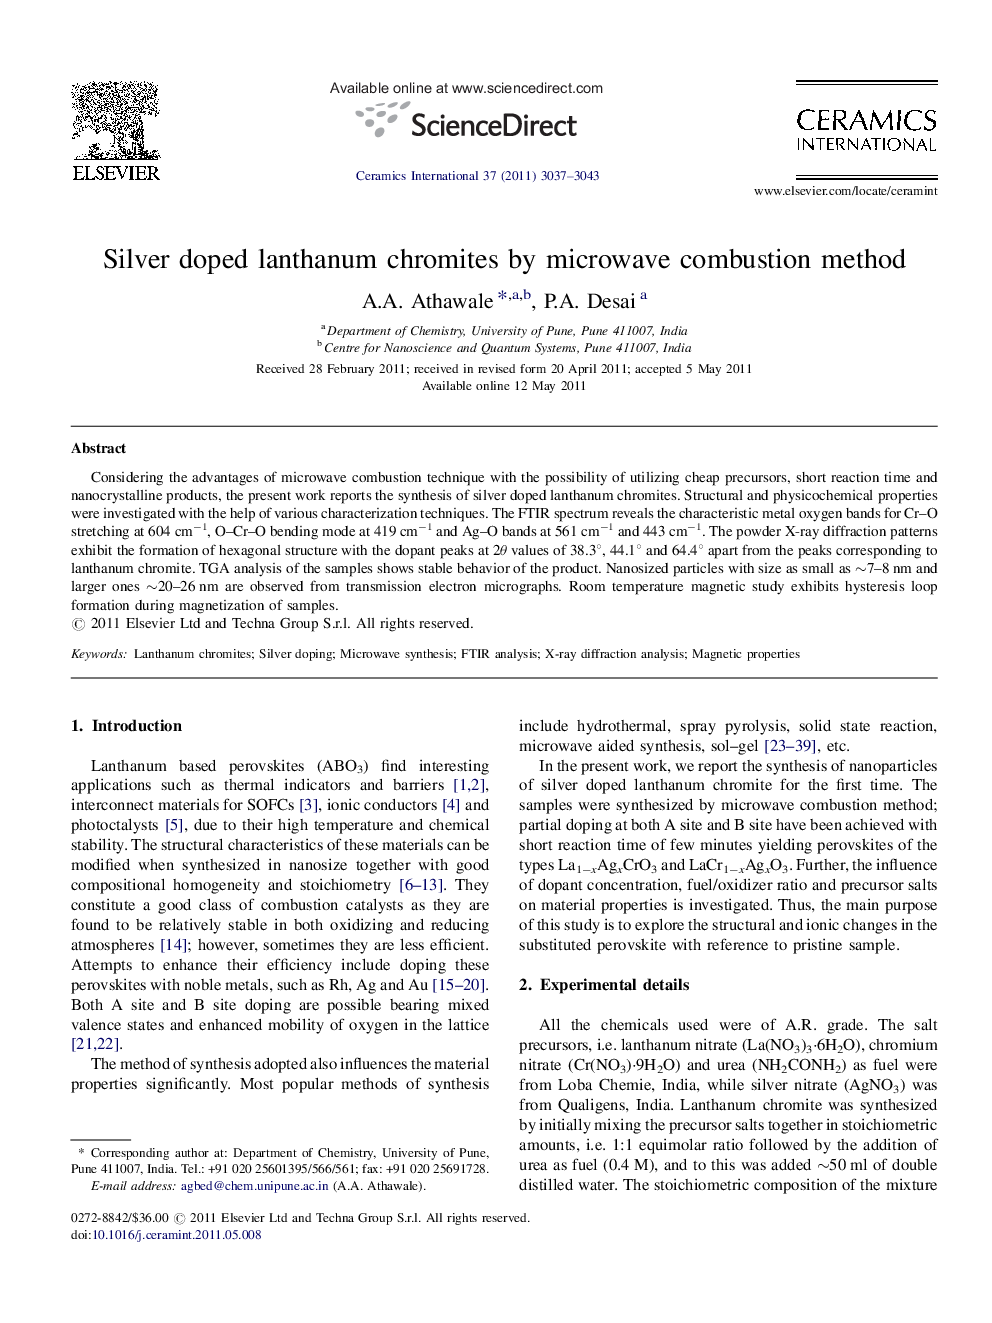 Silver doped lanthanum chromites by microwave combustion method